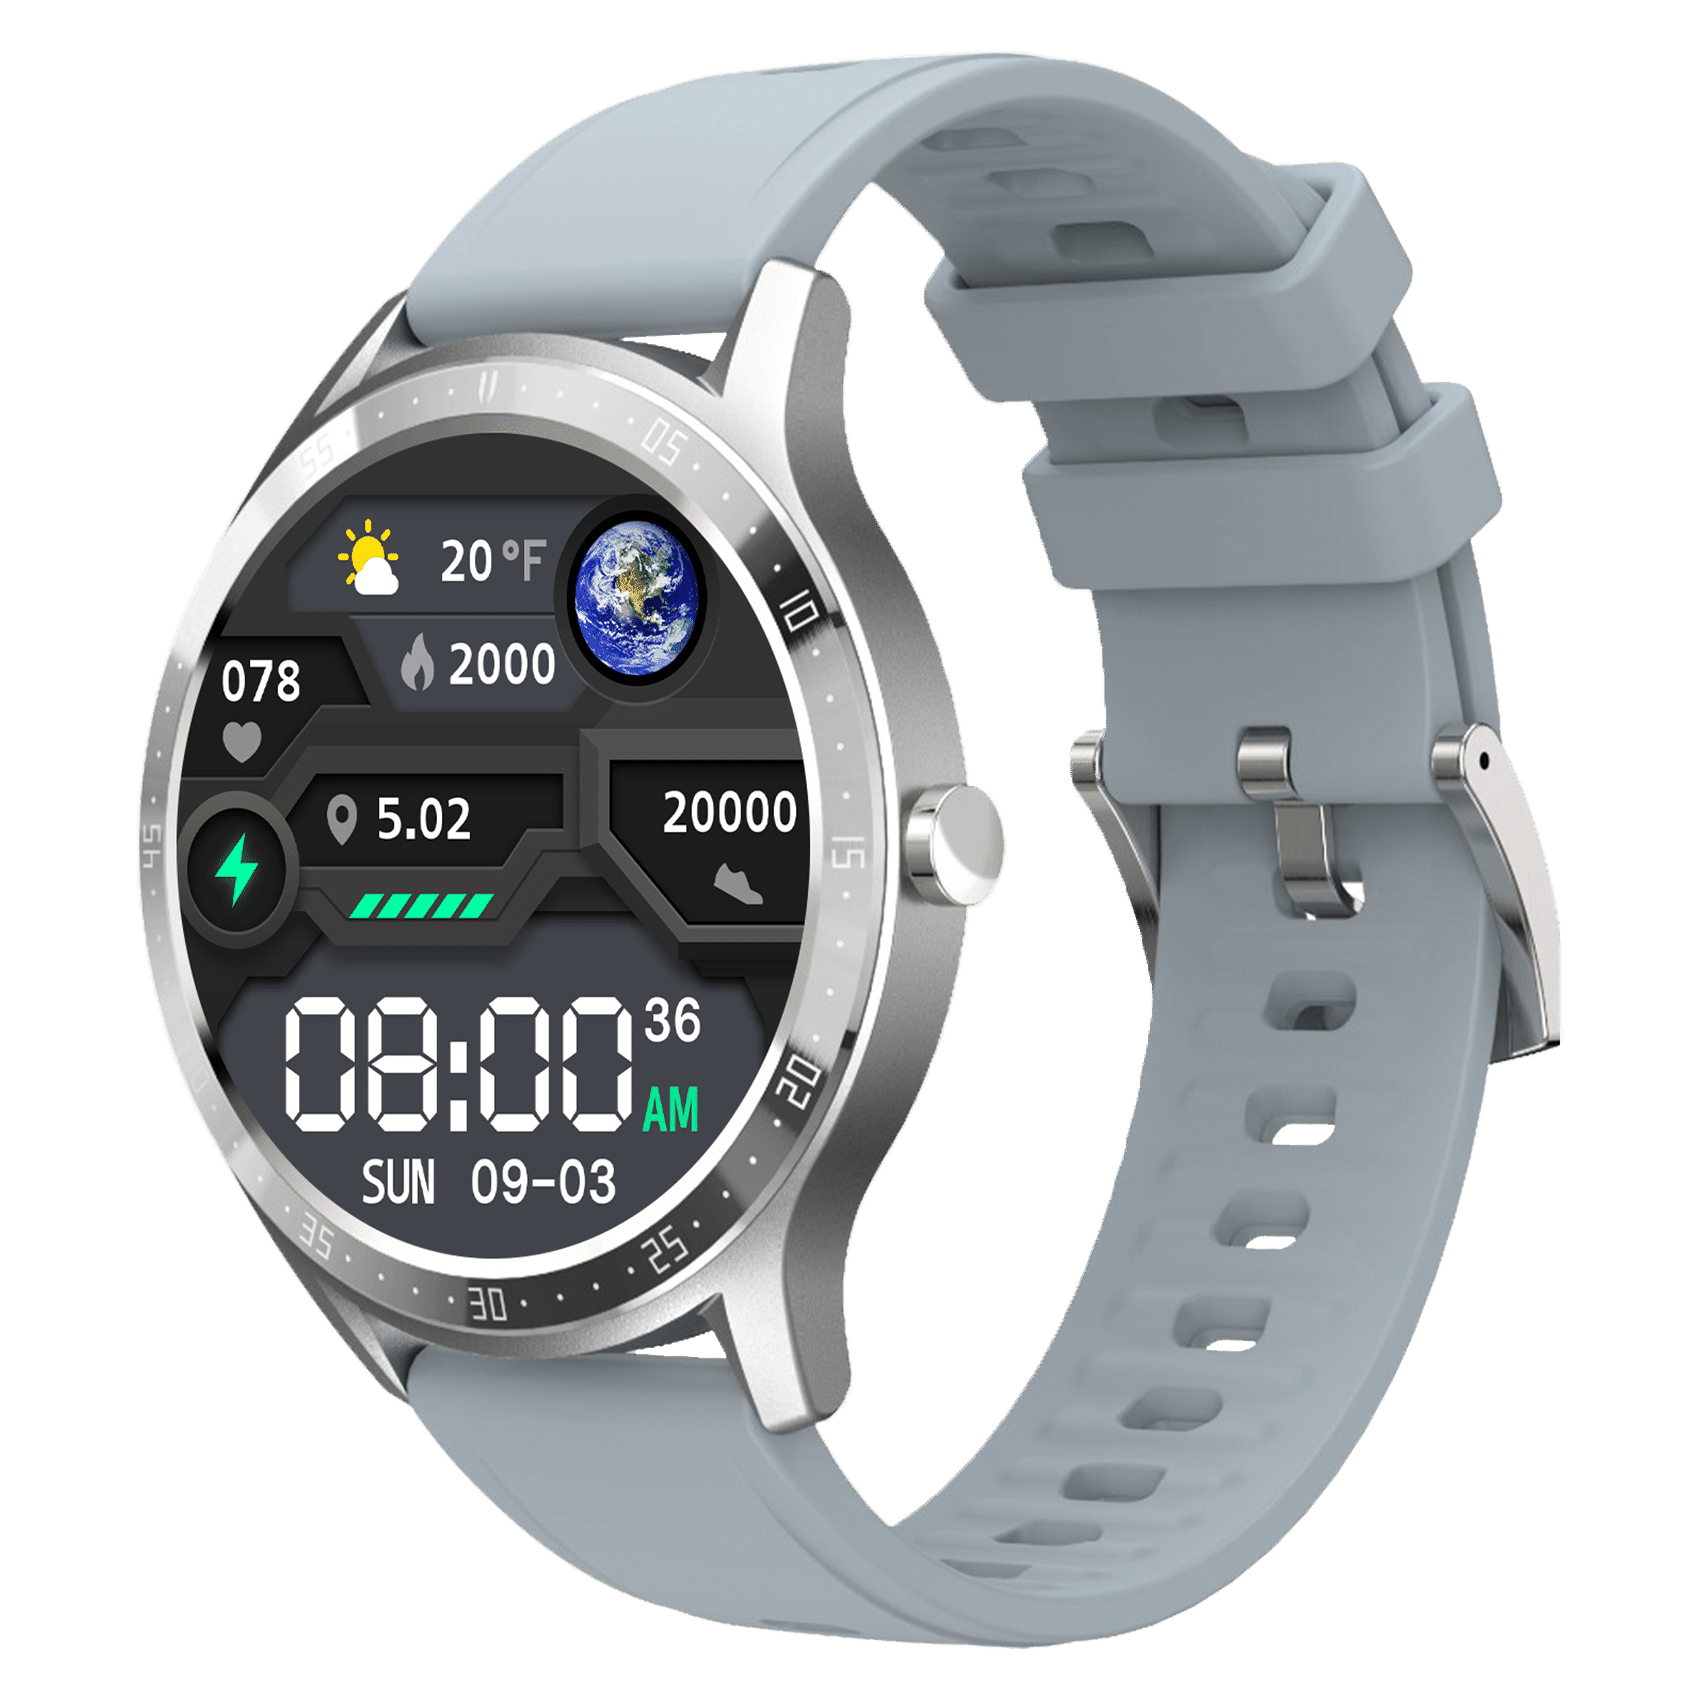 FIRE-BOLTT 360 Smartwatch with Activity Tracker (33mm HD Display, IP67 Water Resistant, Grey Strap)